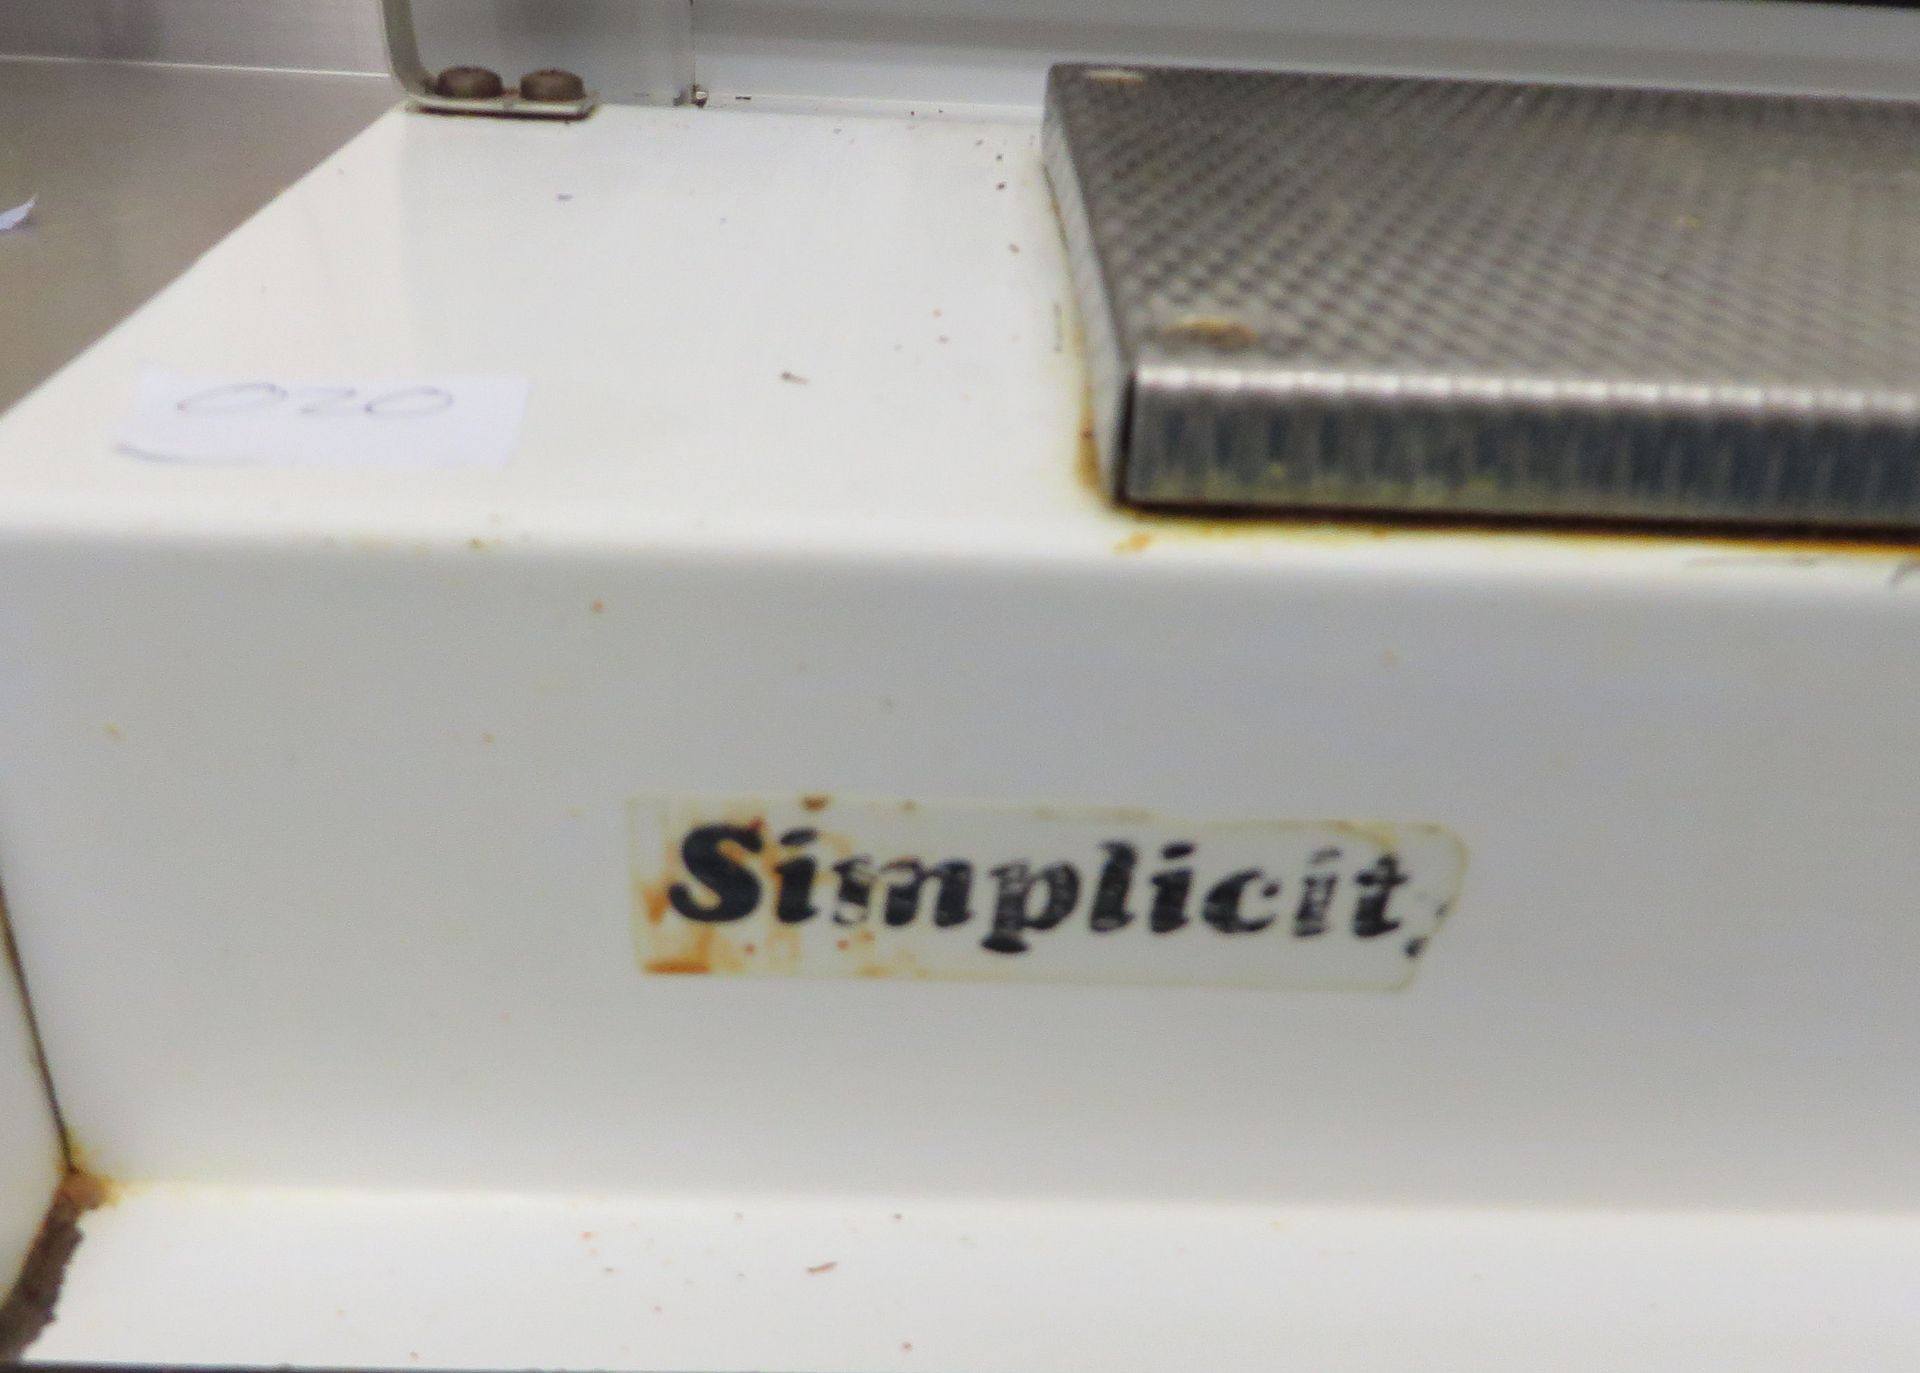 1 x Simplicity Overwrapper Stretch Film Hot Wire Tray Wrapper - Ref: 020 - CL173 - Location: Altrinc - Image 3 of 5